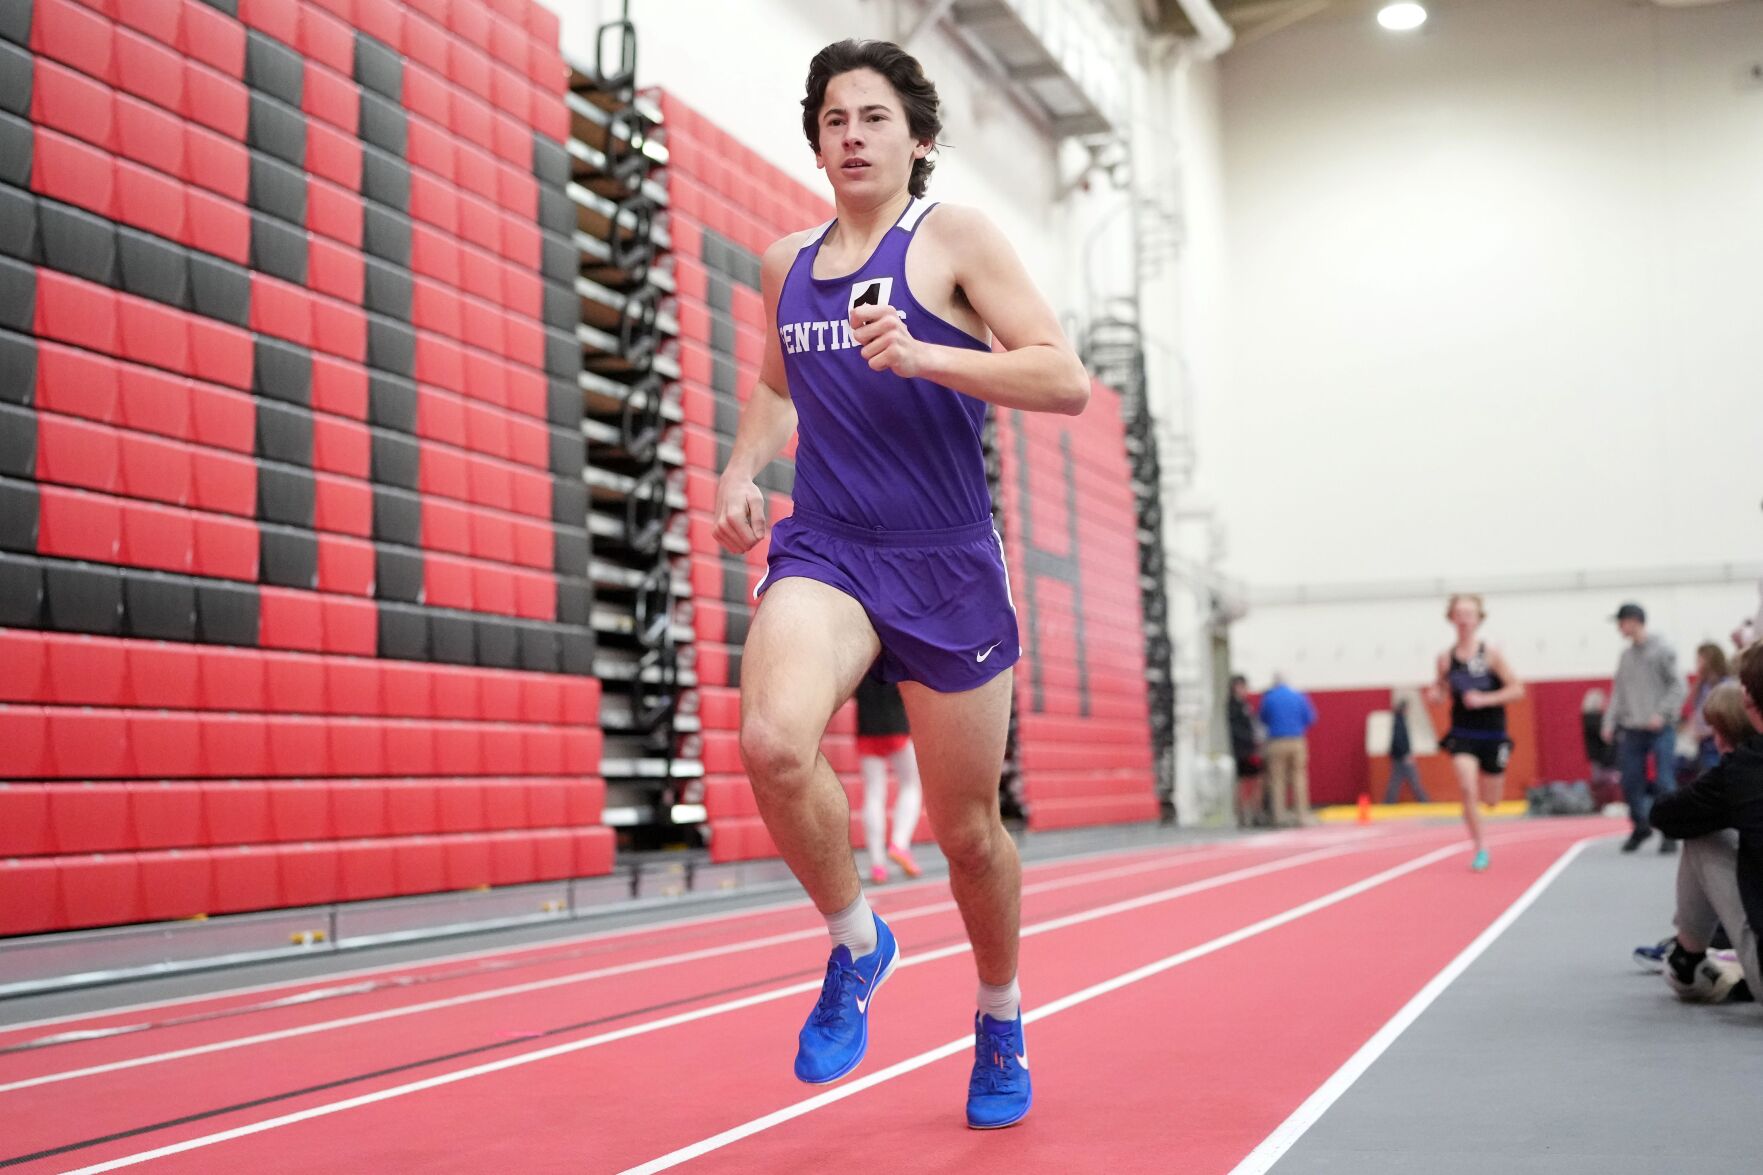 Top Performances and Qualifications at CVAC Indoor Track and Field Qualifiers